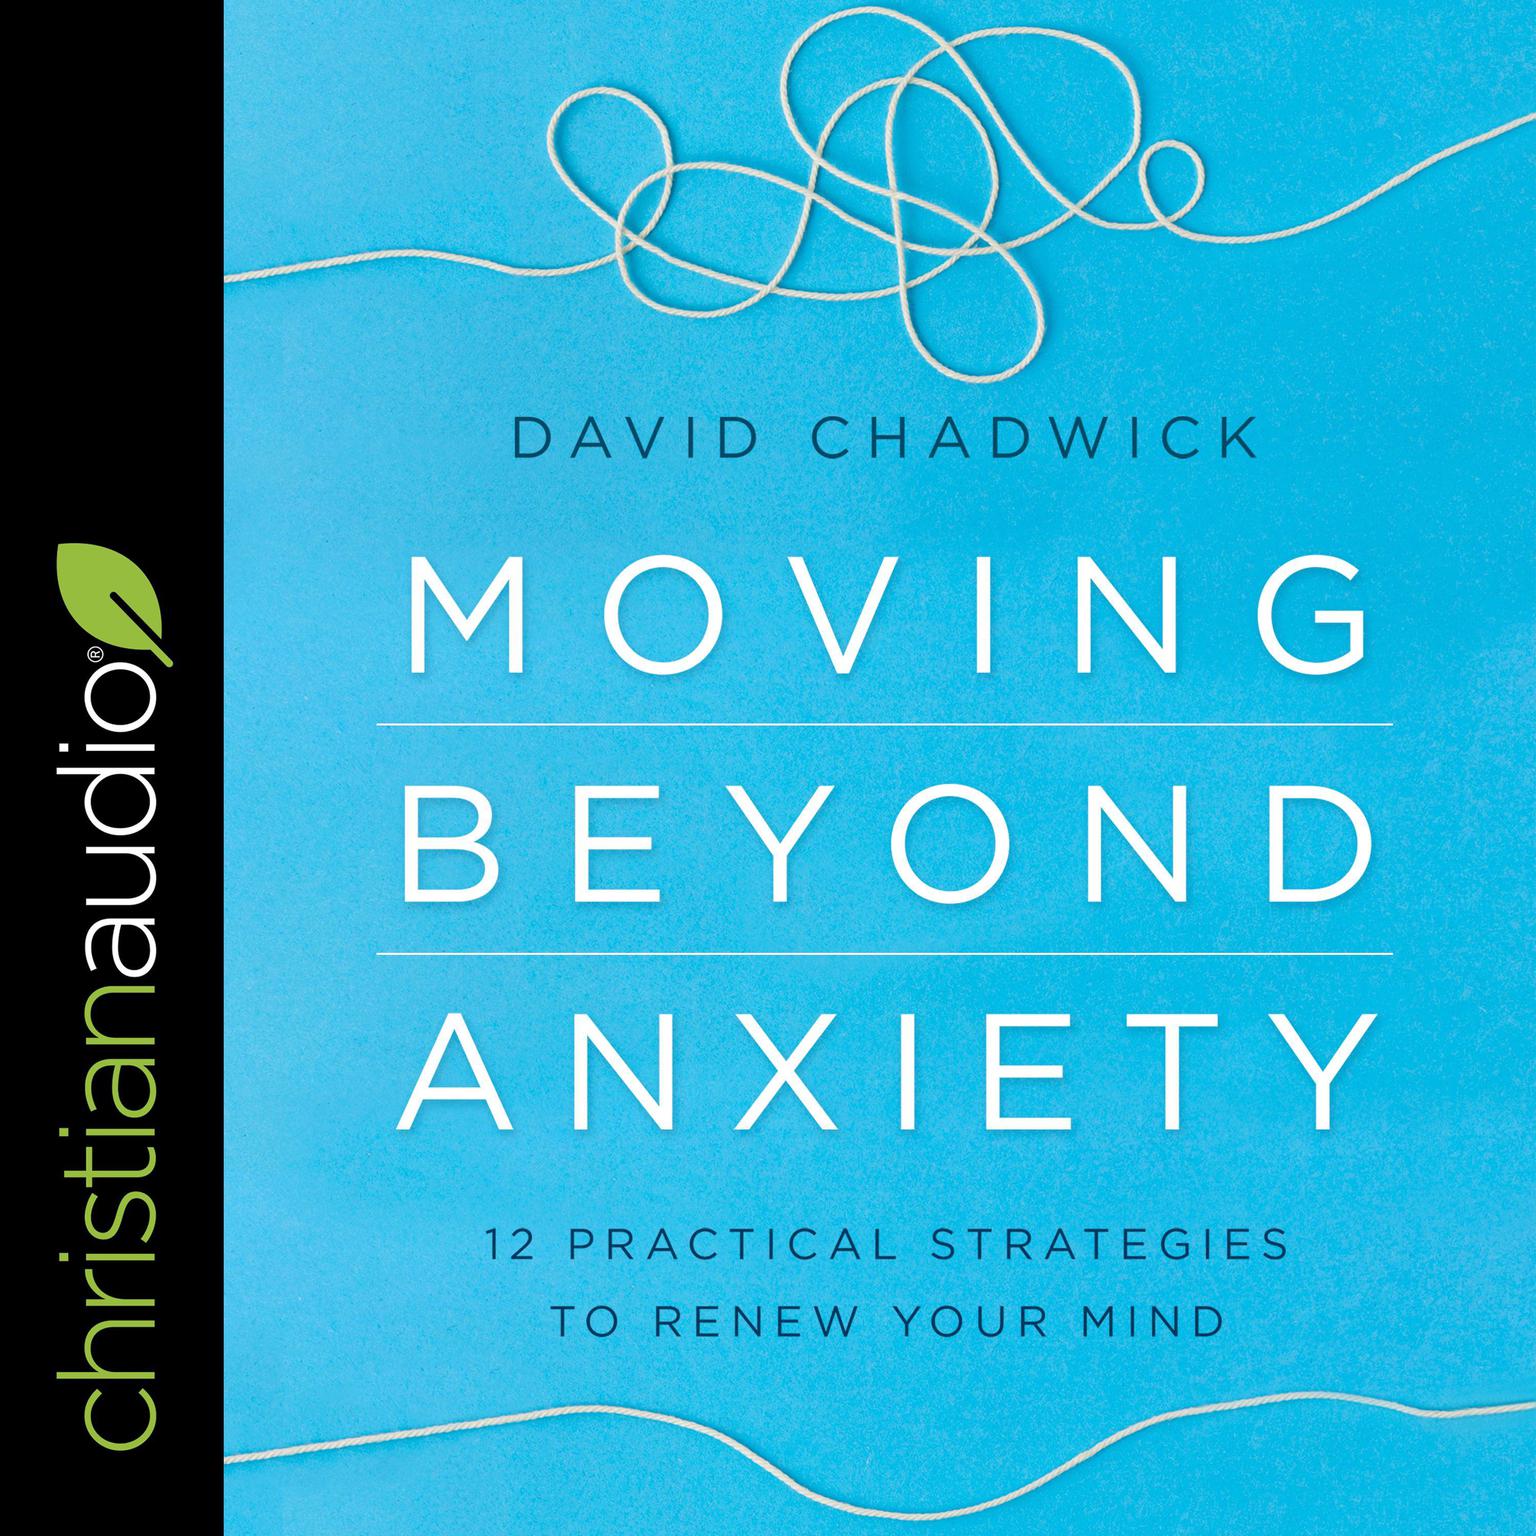 Moving Beyond Anxiety: 12 Practical Strategies to Renew Your Mind Audiobook, by David Chadwick